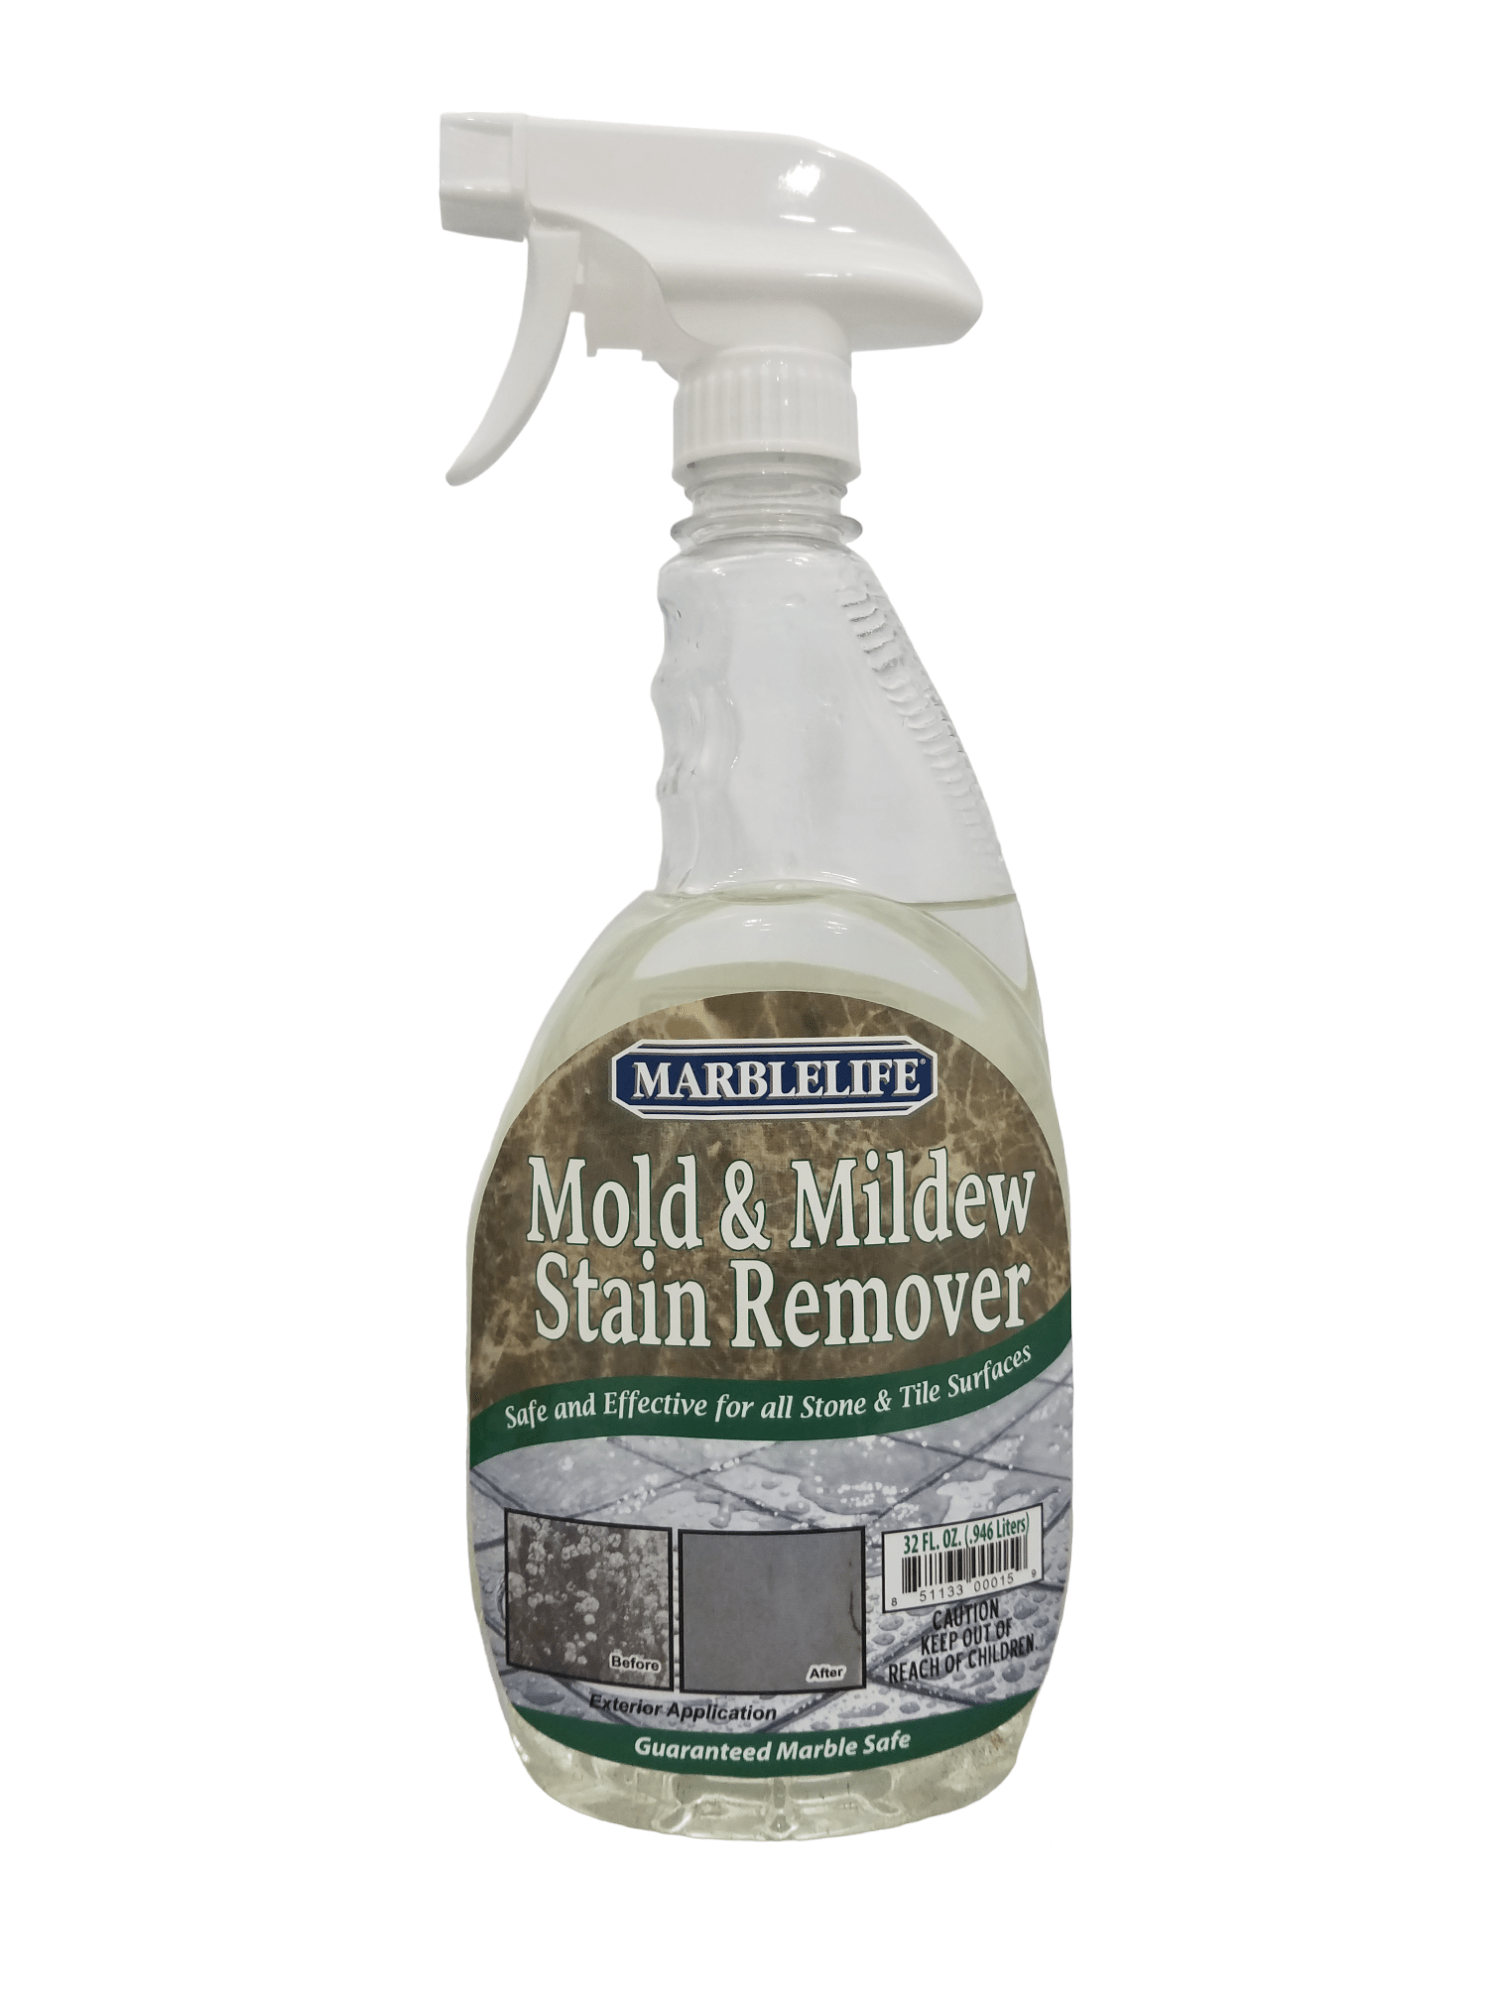 Effective Strategies for Mold and Mildew Removal in Homes